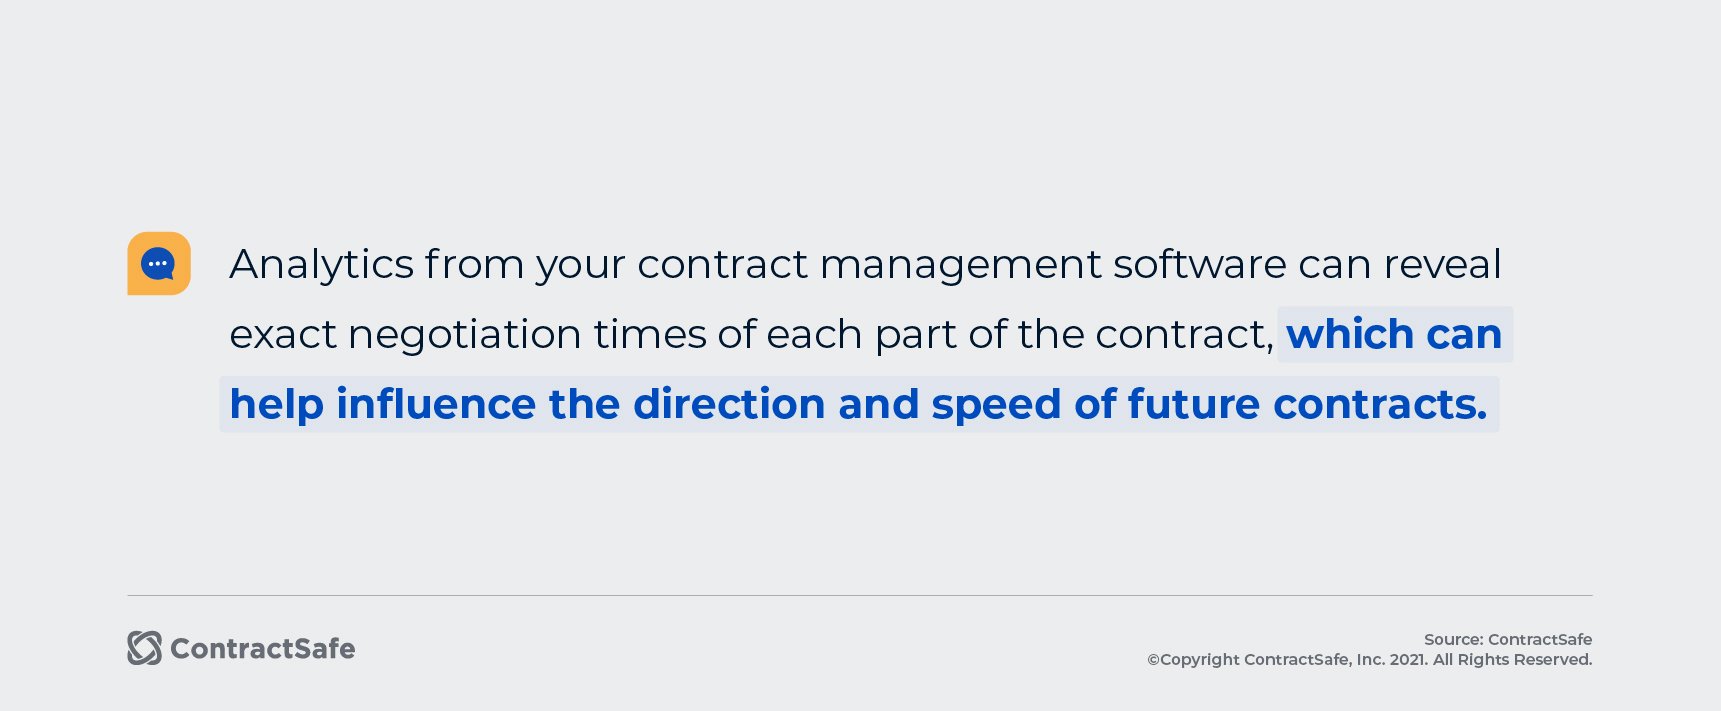 Analytics from your contract management software can reveal exact negotiation times of each part of the contract, which can help influence the direction and speed of future contracts. 